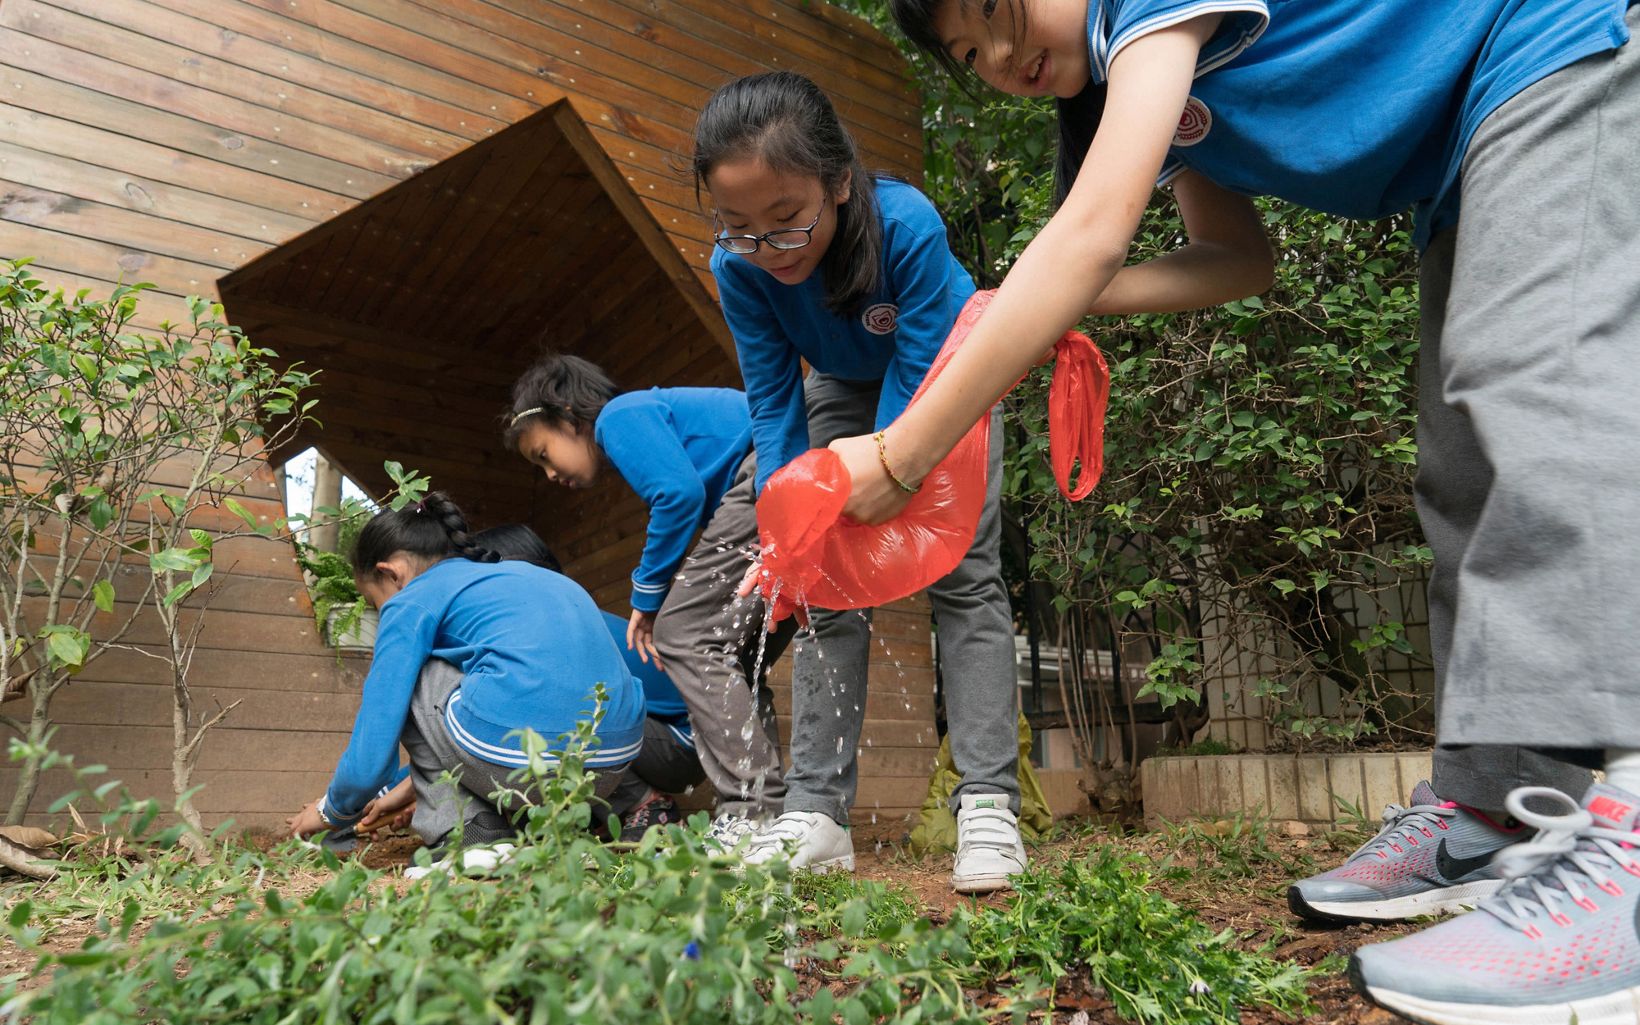 Children gather during a gardening activity at the Sinolink Primary School in Shenzhen, China. November 2017. The Sinolink Primary School in Shenzhen has implemented a number of sponge city features including permeable surfaces in their sports grounds and entrance walking areas, added rain barrels, and started a 'young naturalists' class that also teaches students about rainwater management and related gardening. The school is located in Luohu district, Shenzhen, China. TNC's Build Healthy Cities Program.